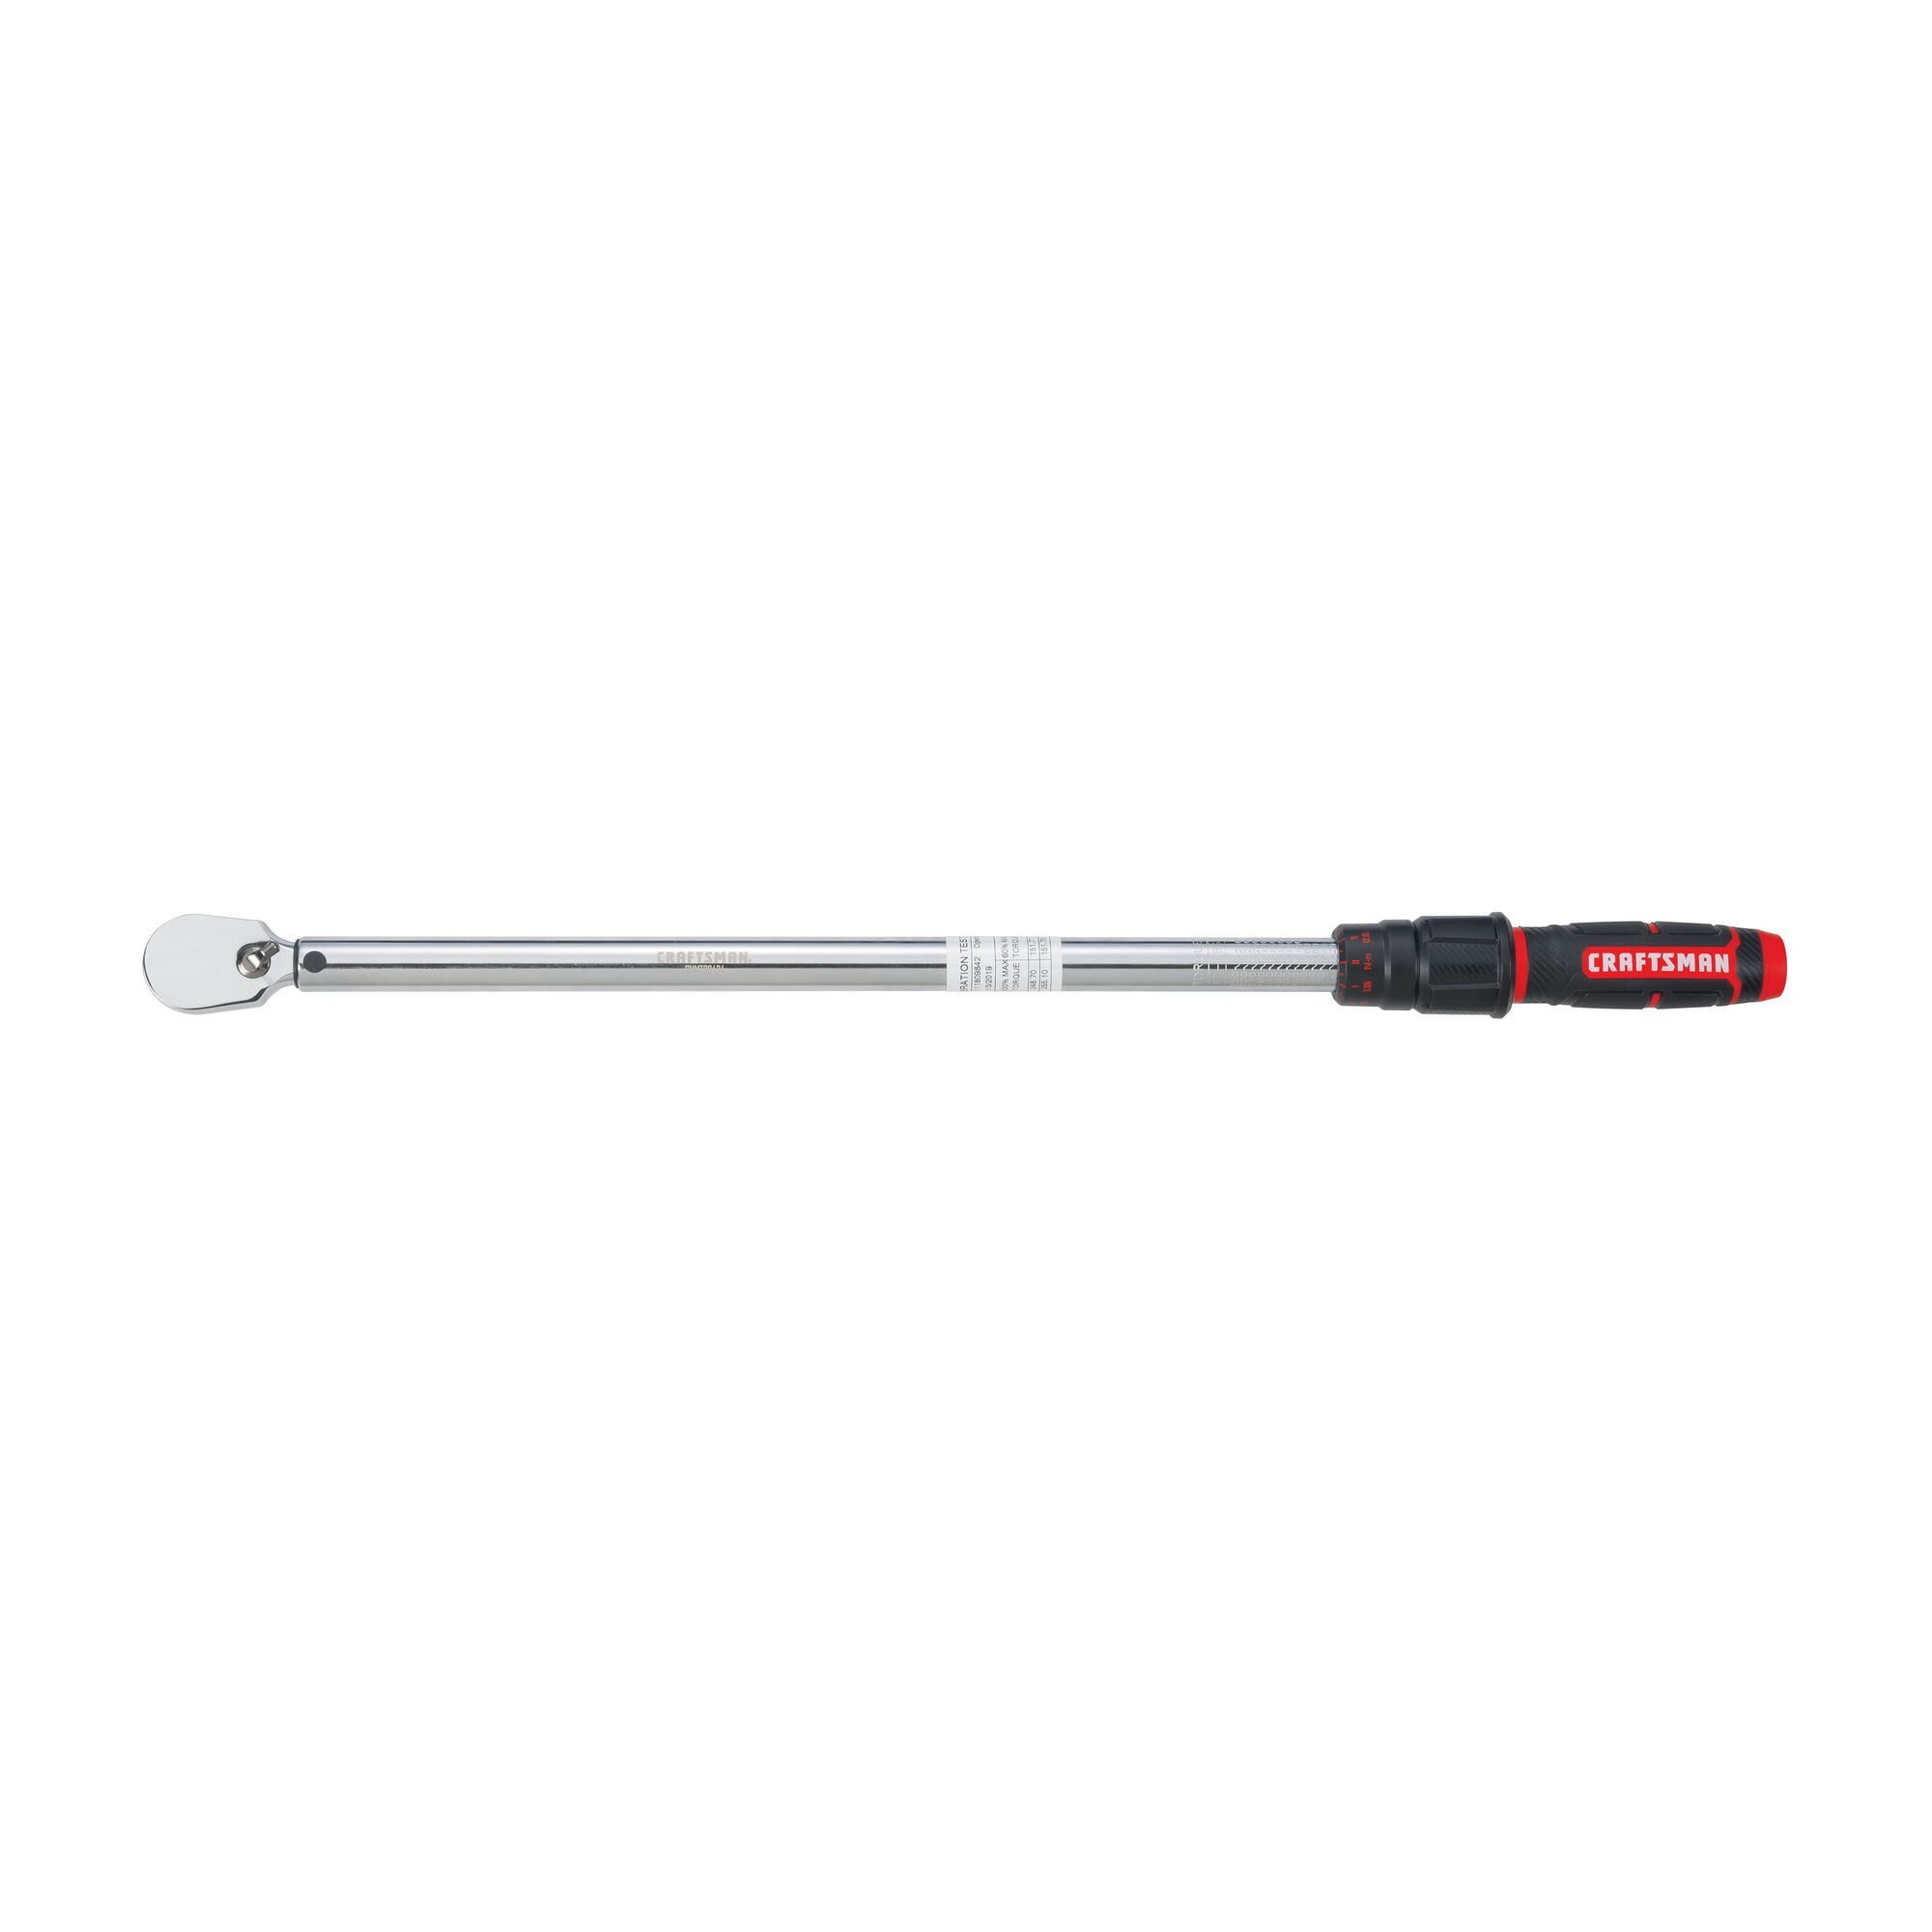 View of CRAFTSMAN Wrenches: Torque on white background